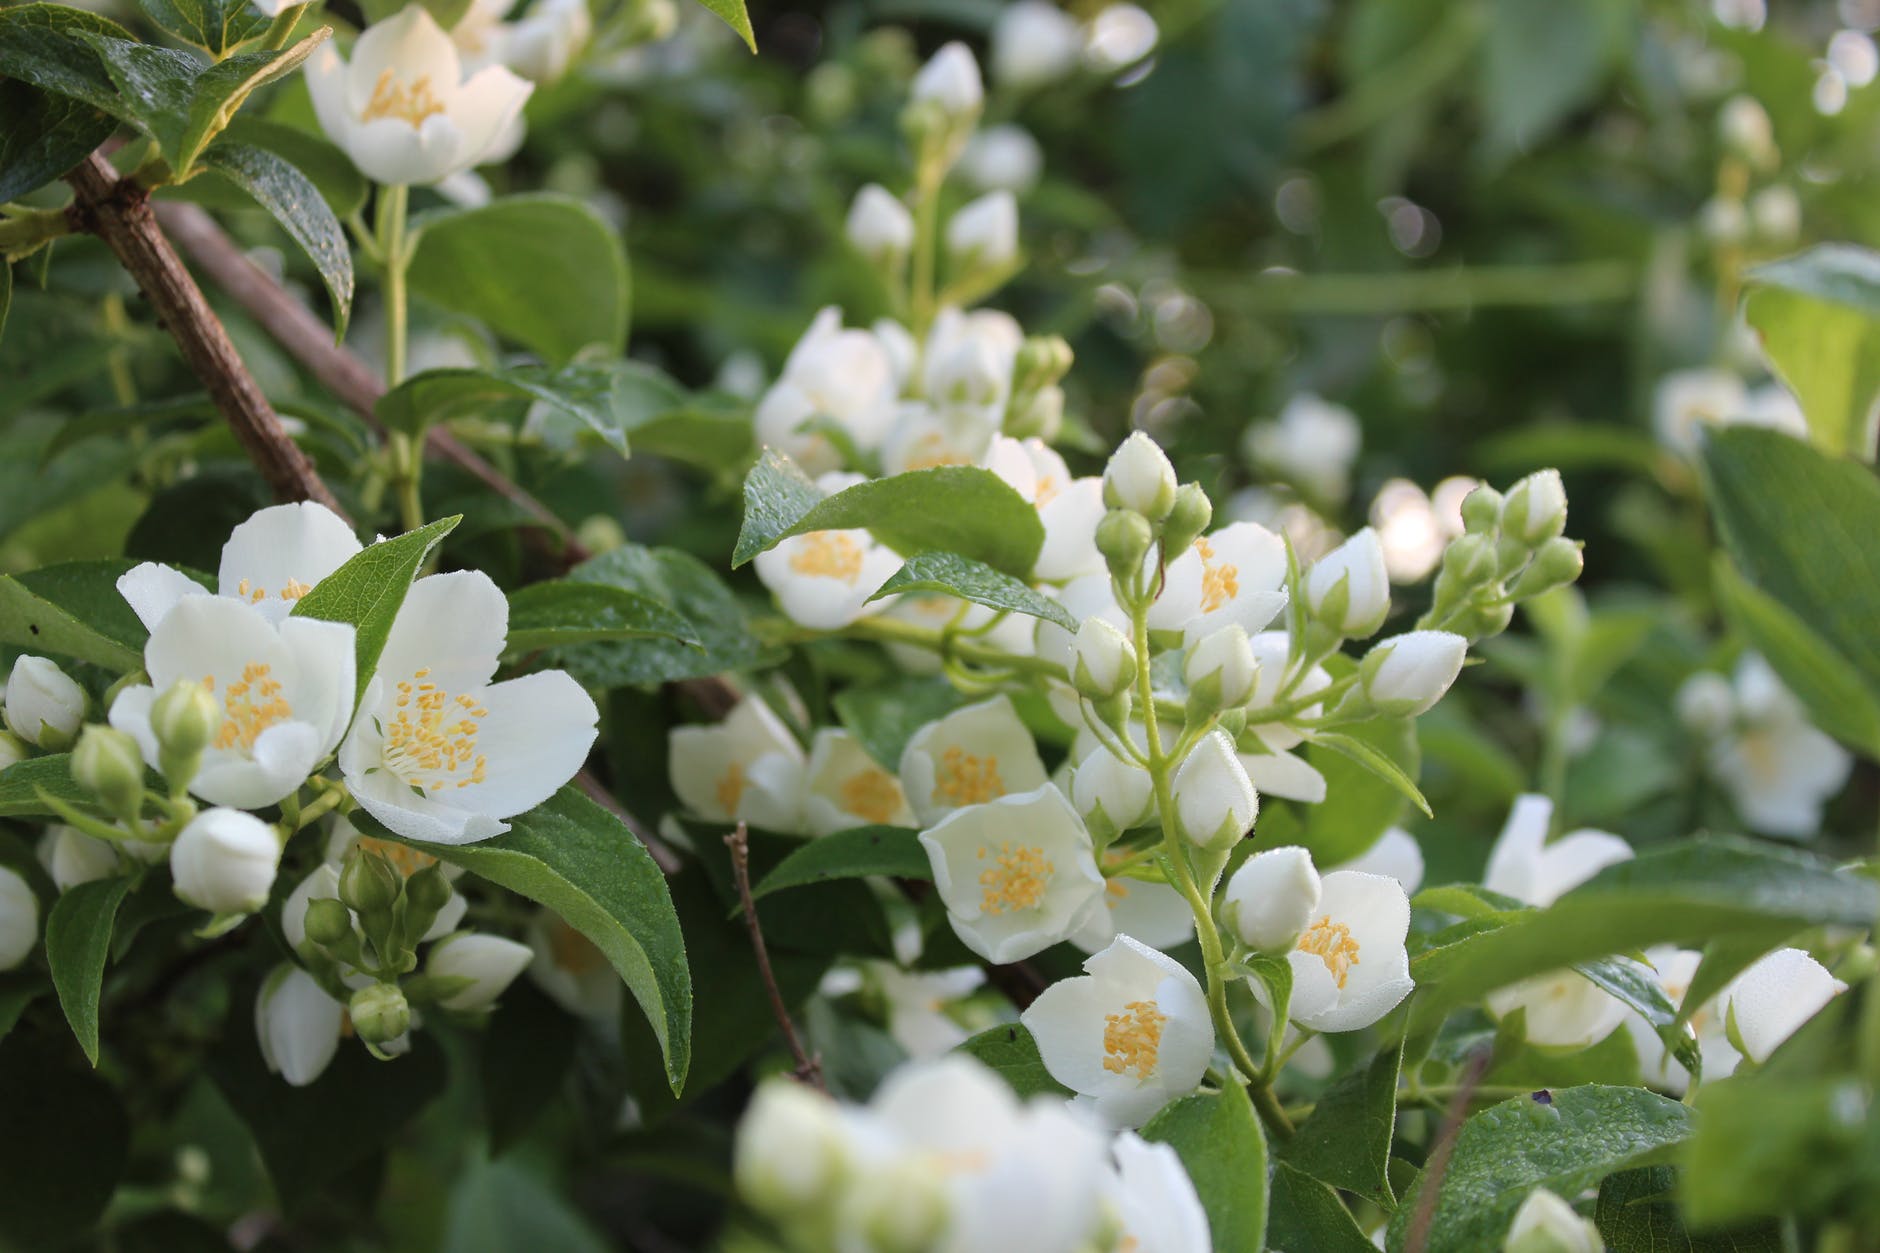 jasmine flowers with green leaves